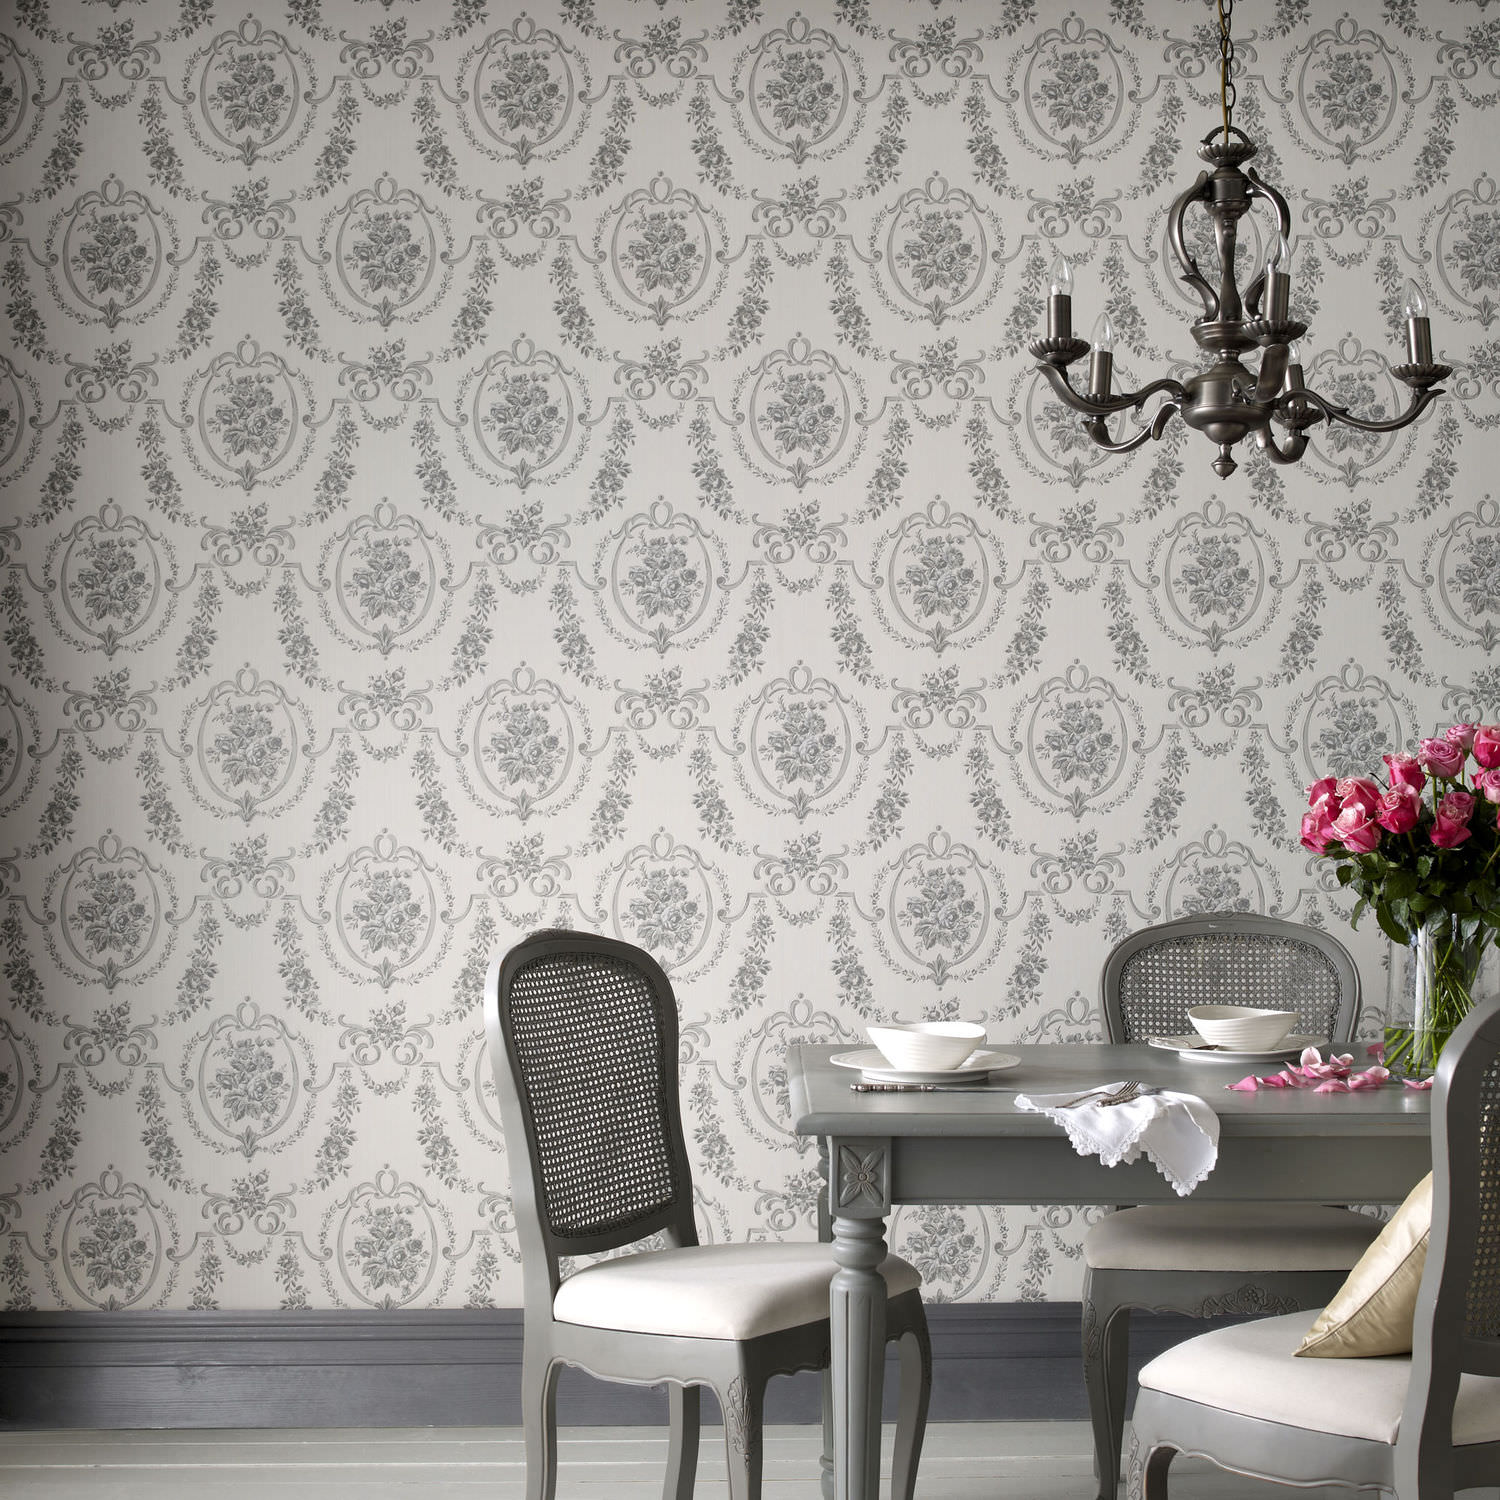 Traditional Wallpaper / Vinyl / Patterned / Washable - Superfresco Easy Laos Trail , HD Wallpaper & Backgrounds